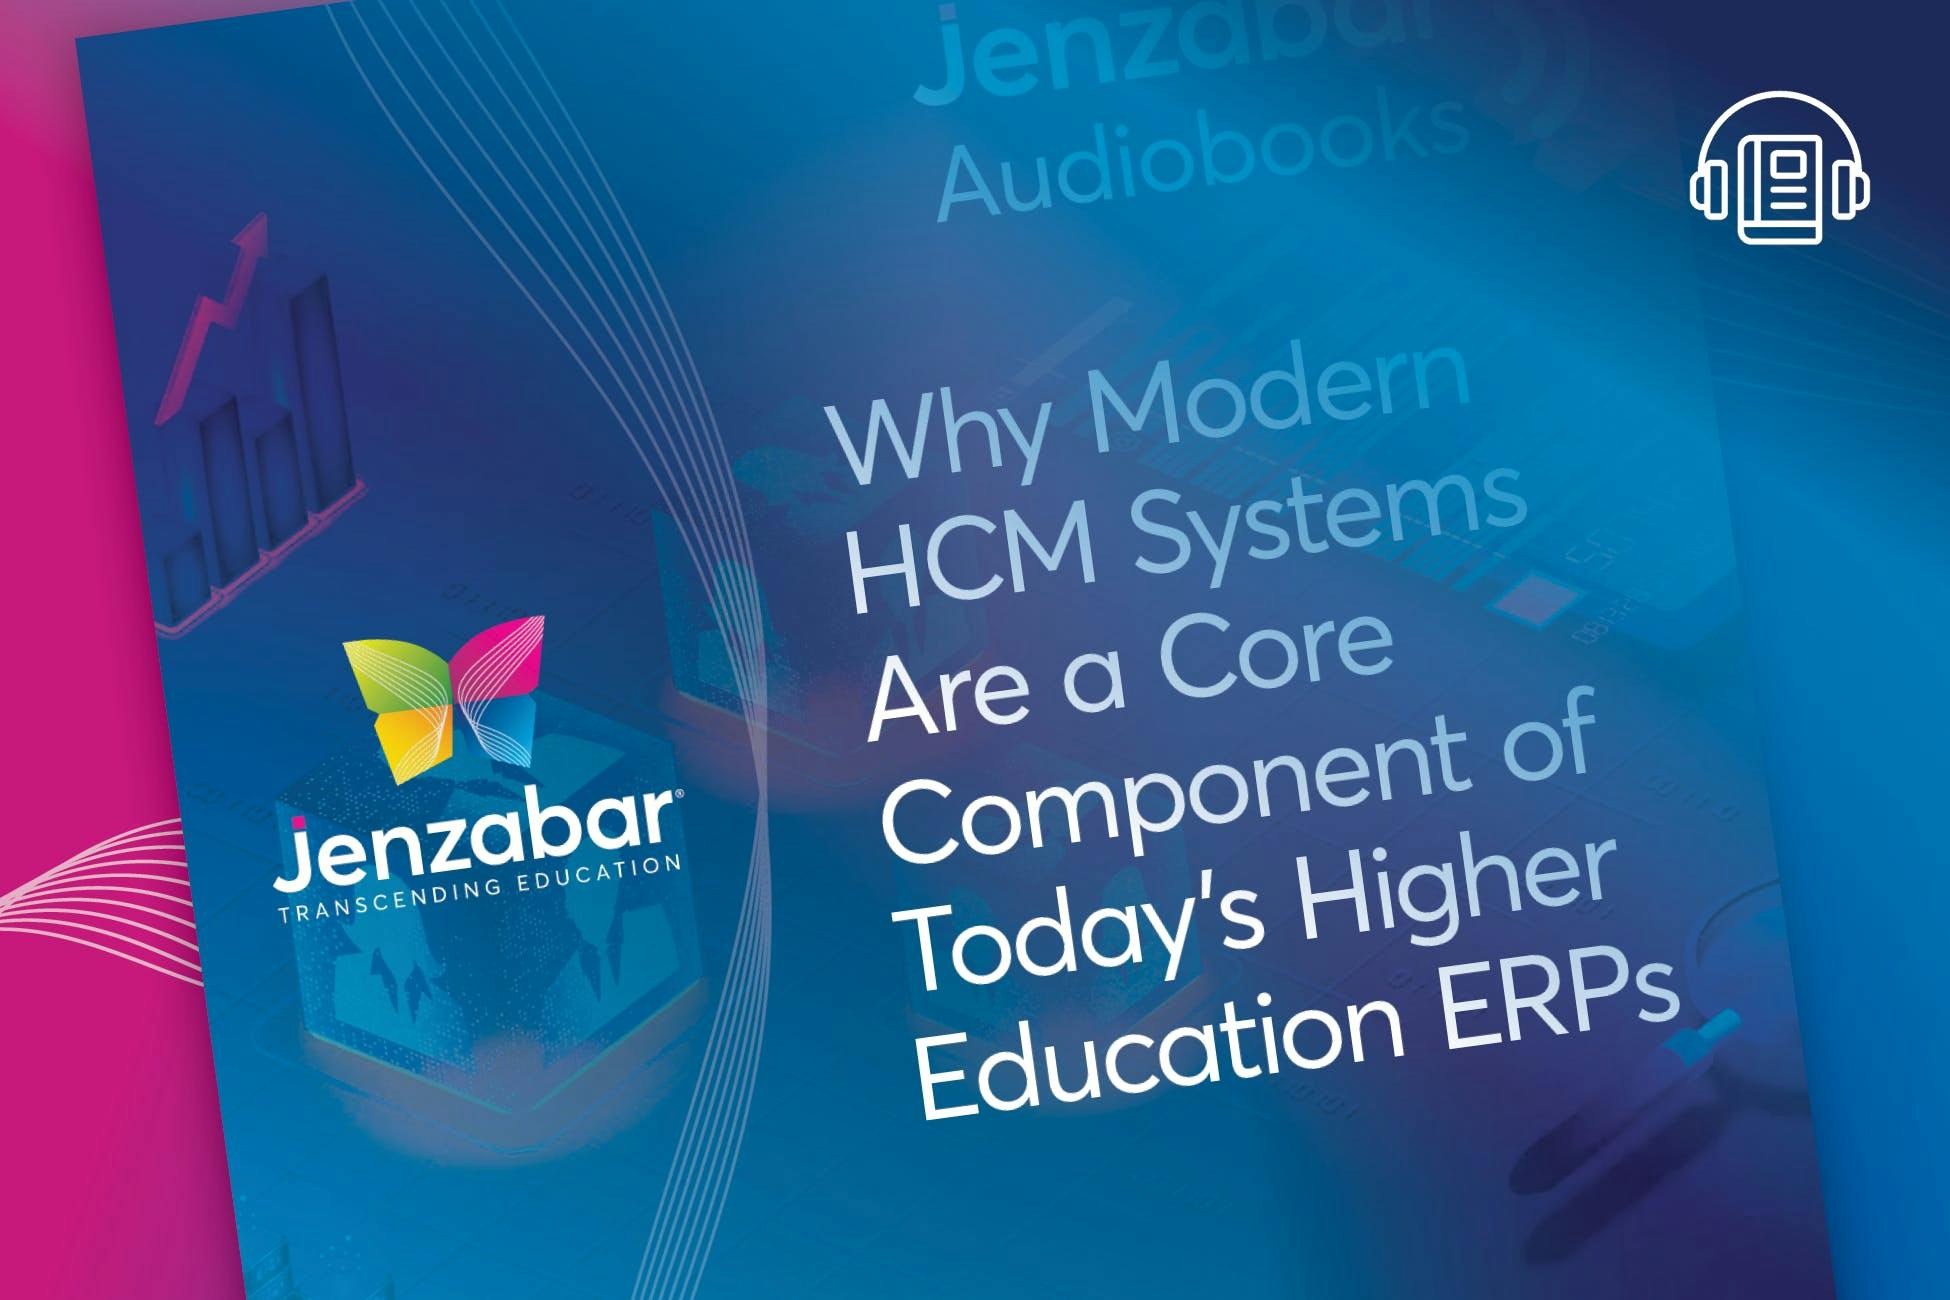 Audiobook: Why Modern HCM Systems Are a Core Component of Today’s Higher Education ERPs